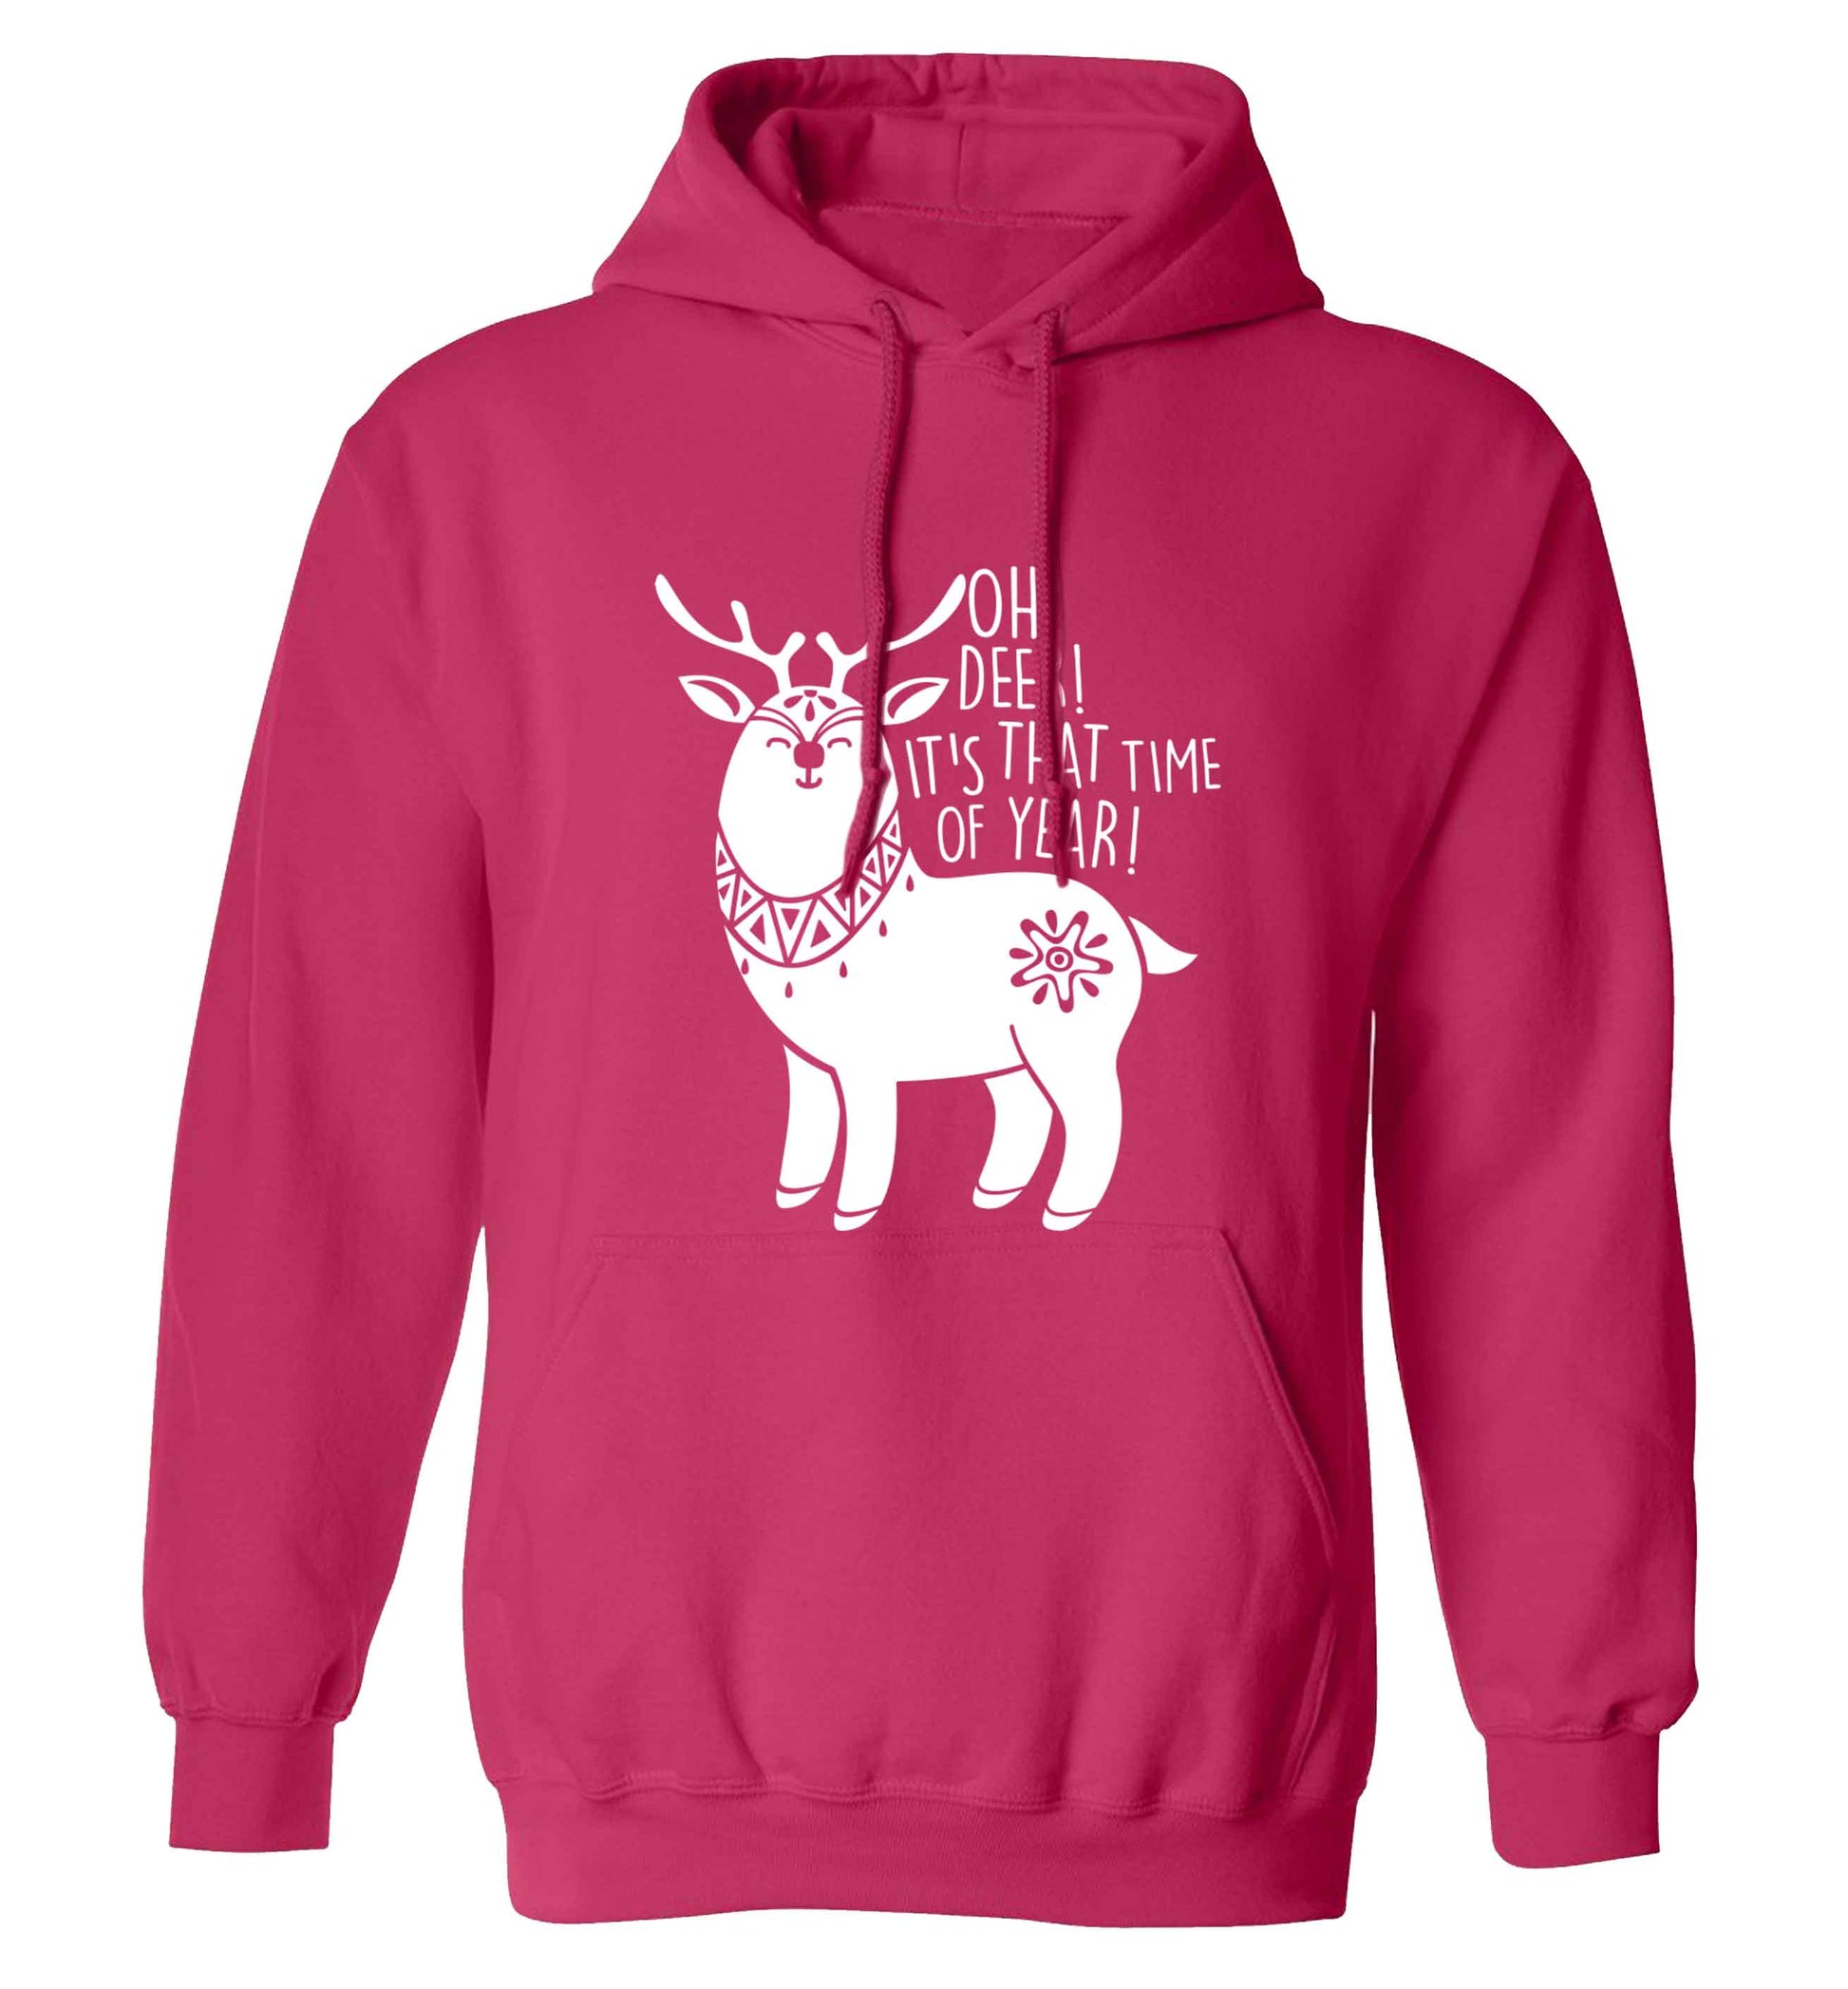 Oh dear it's that time of year adults unisex pink hoodie 2XL